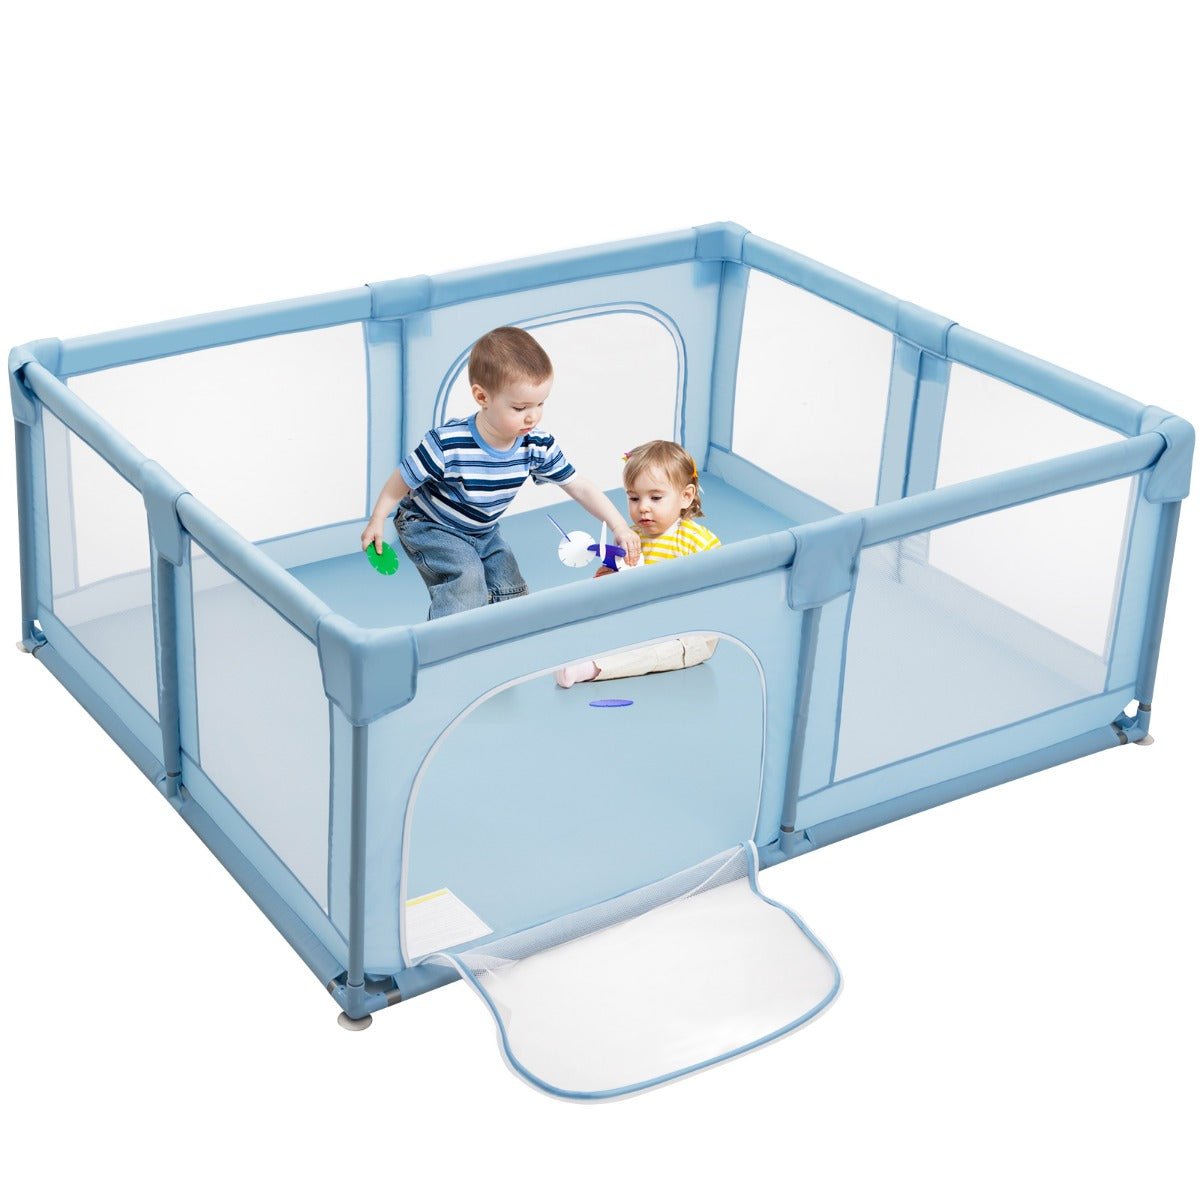 Durable Infant Play Area for Home & Outdoors